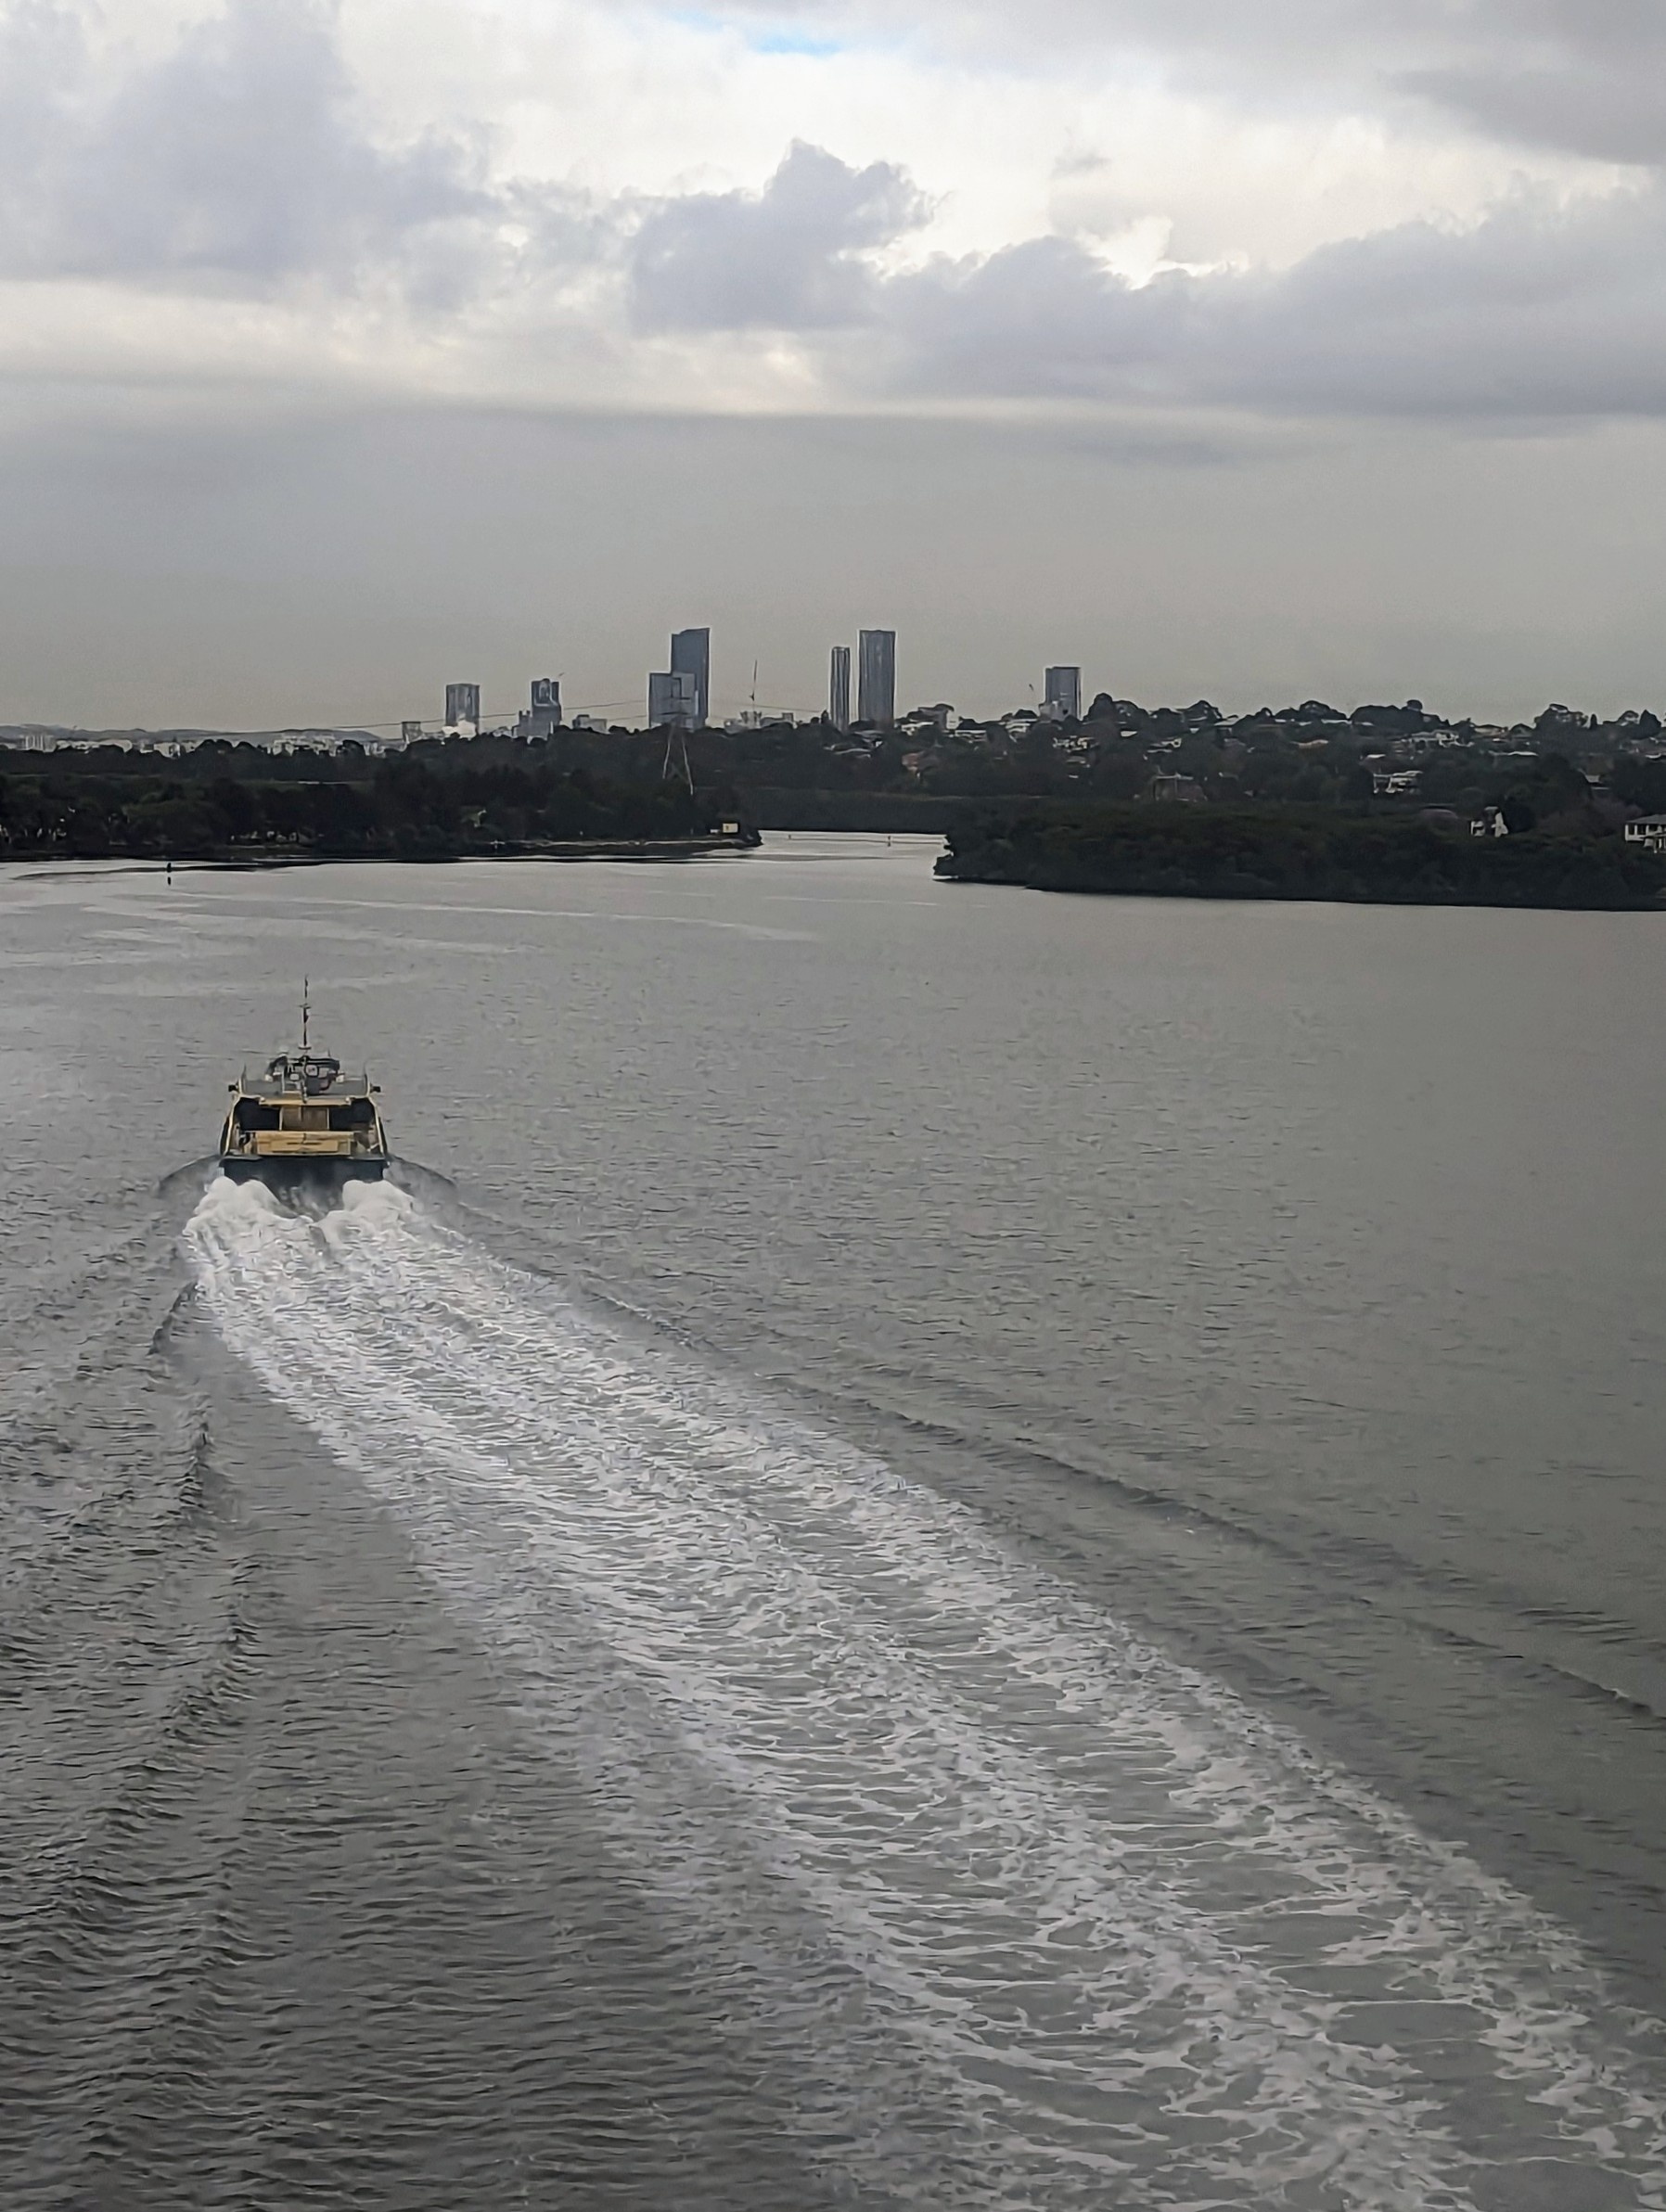 A Sydney ferry leaves a long wake in the river on its way towards the high-rise towers of Parramatta.